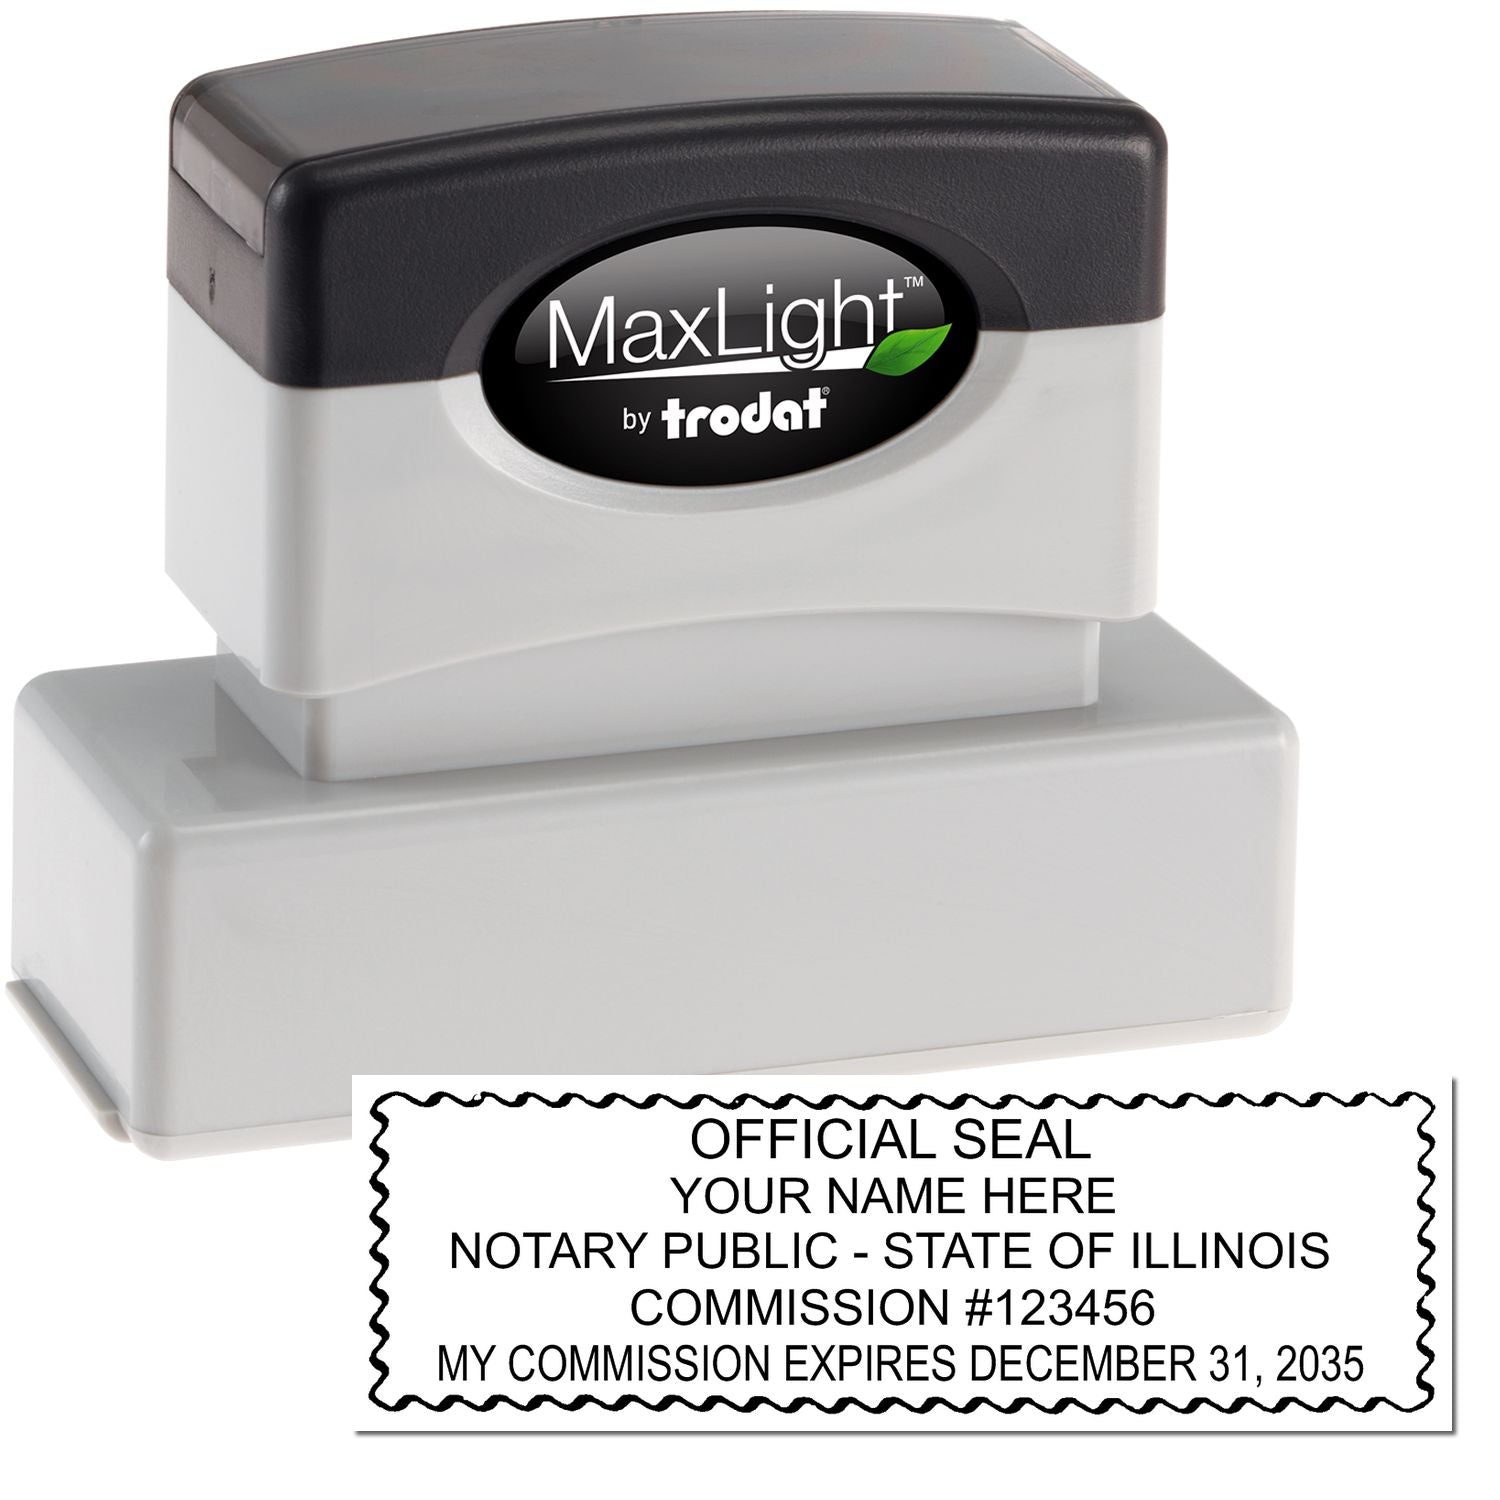 The main image for the MaxLight Premium Pre-Inked Illinois Rectangular Notarial Stamp depicting a sample of the imprint and electronic files